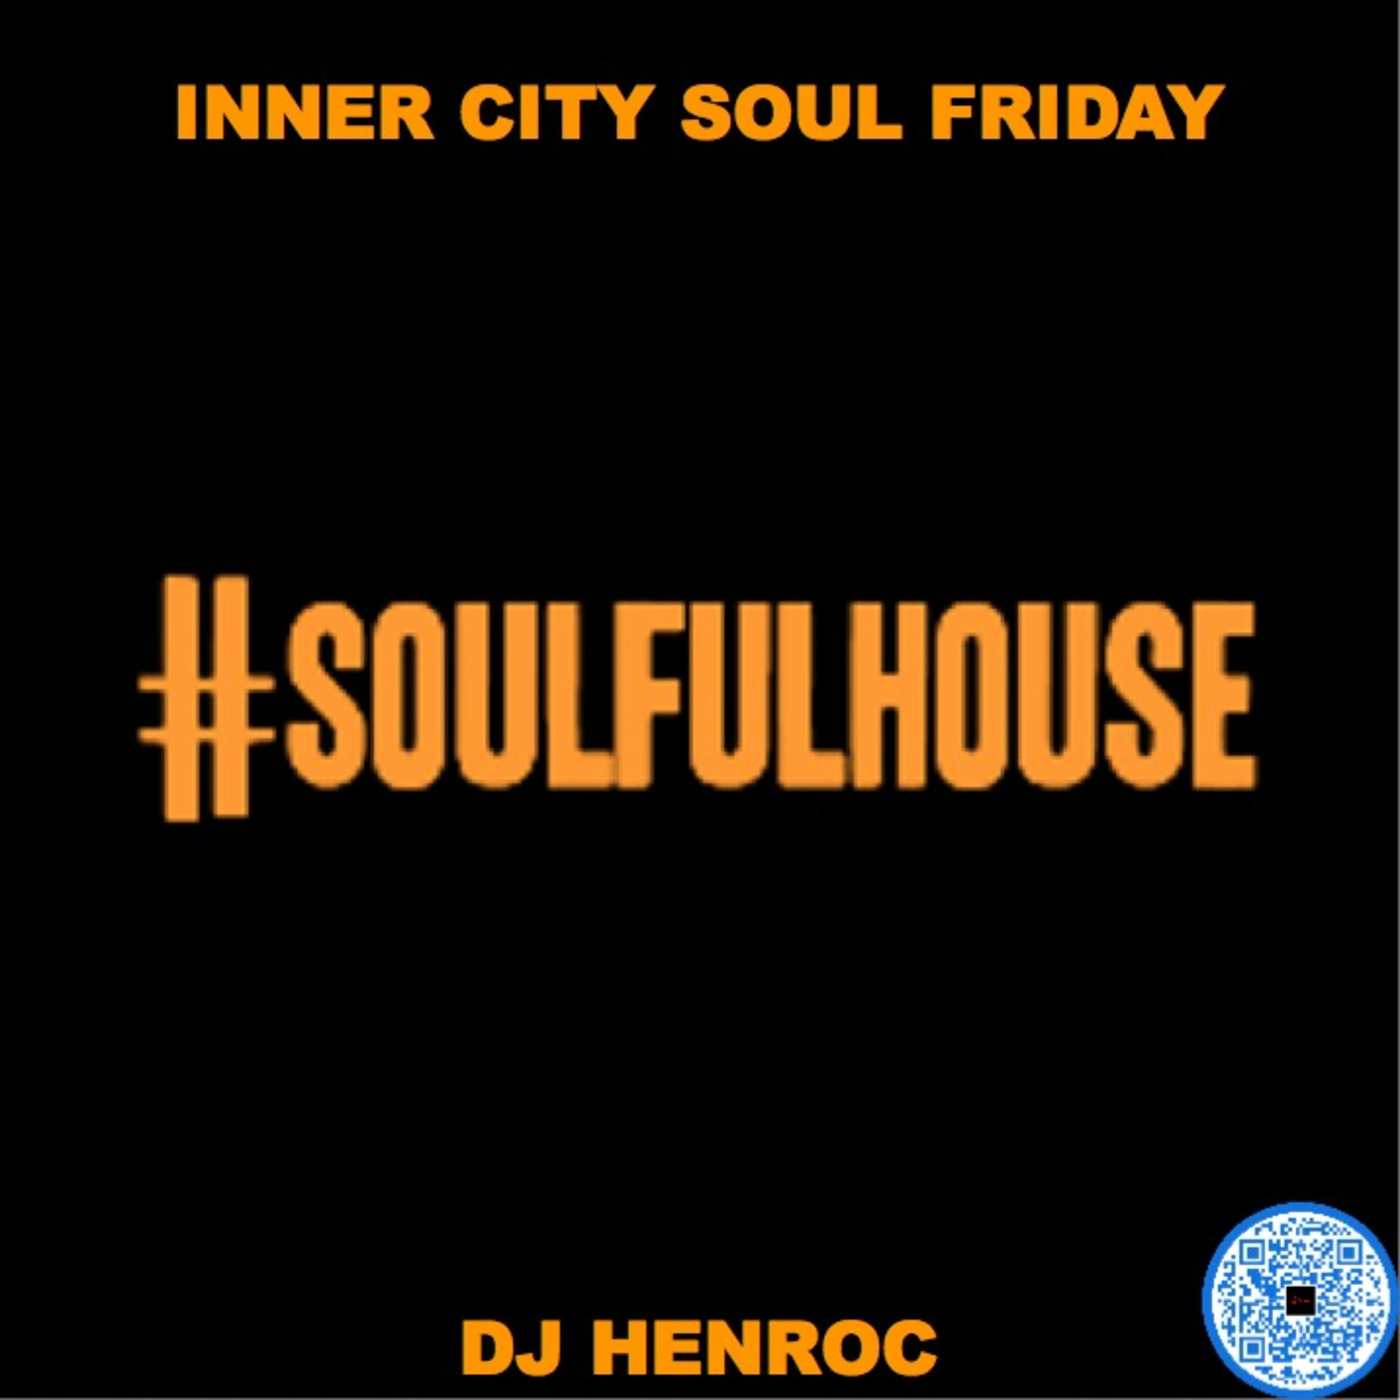 Episode 331: INNER CITY SOUL FRIDAY ---> CLASIC SOULFUL HOUSE EDITION